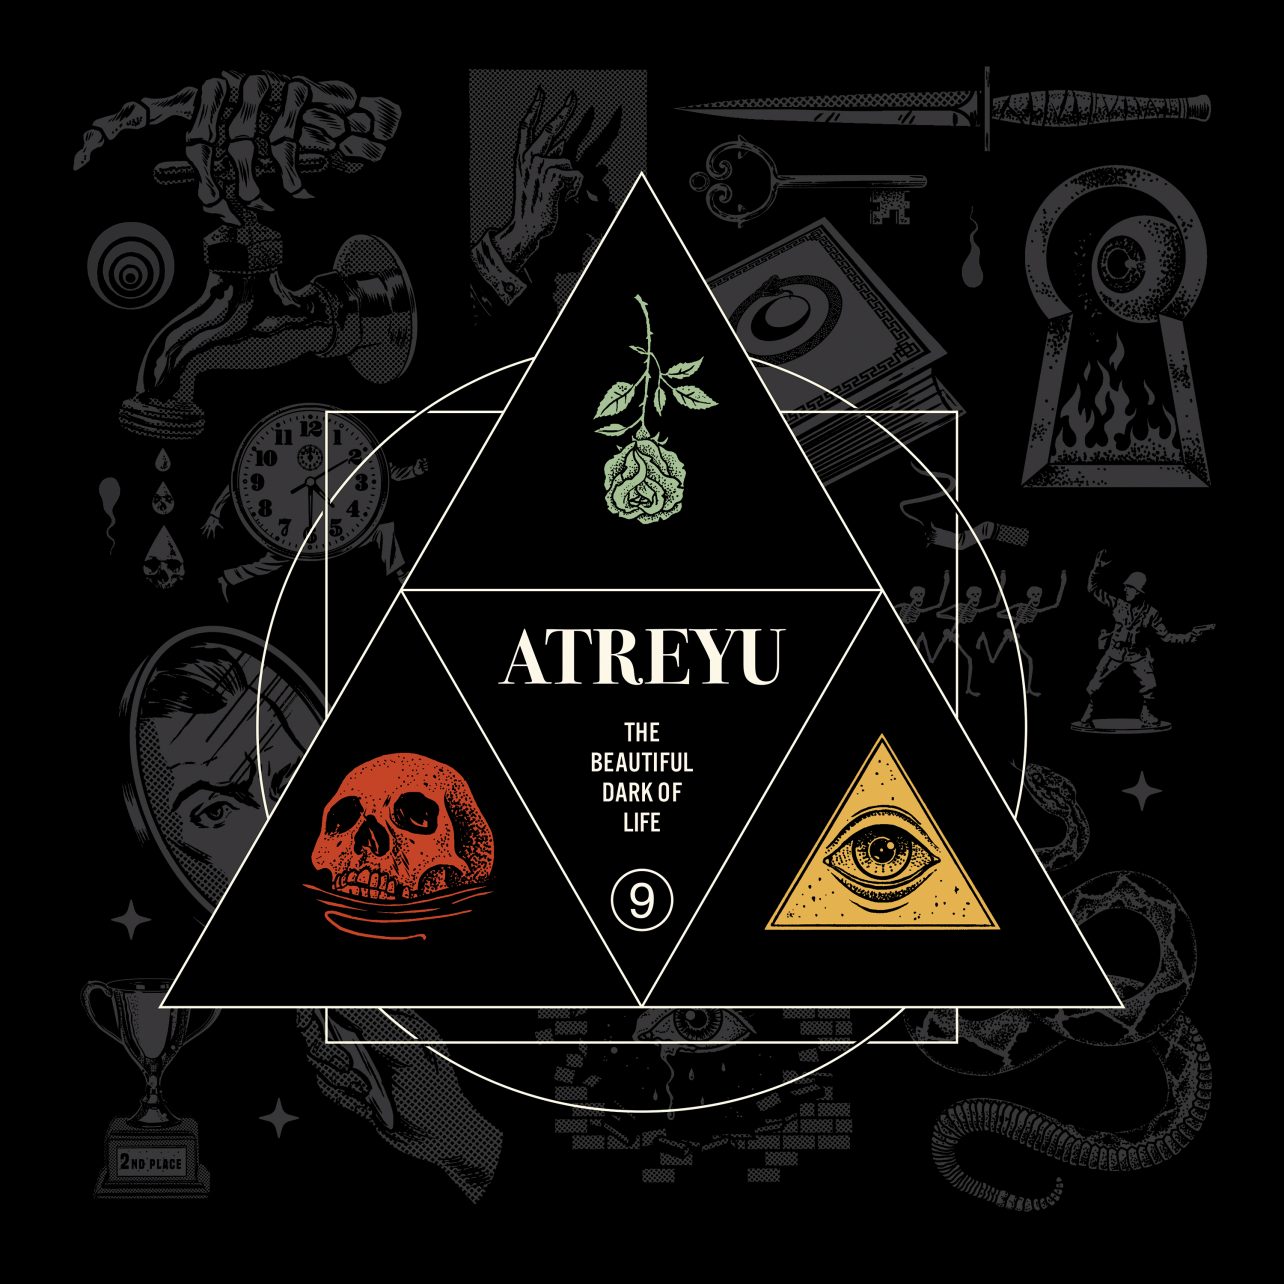 Atreyu’s Latest Album, “The Beautiful Dark of Life” Beautifully Talks of Self-Discovery and Finding Yourself Again